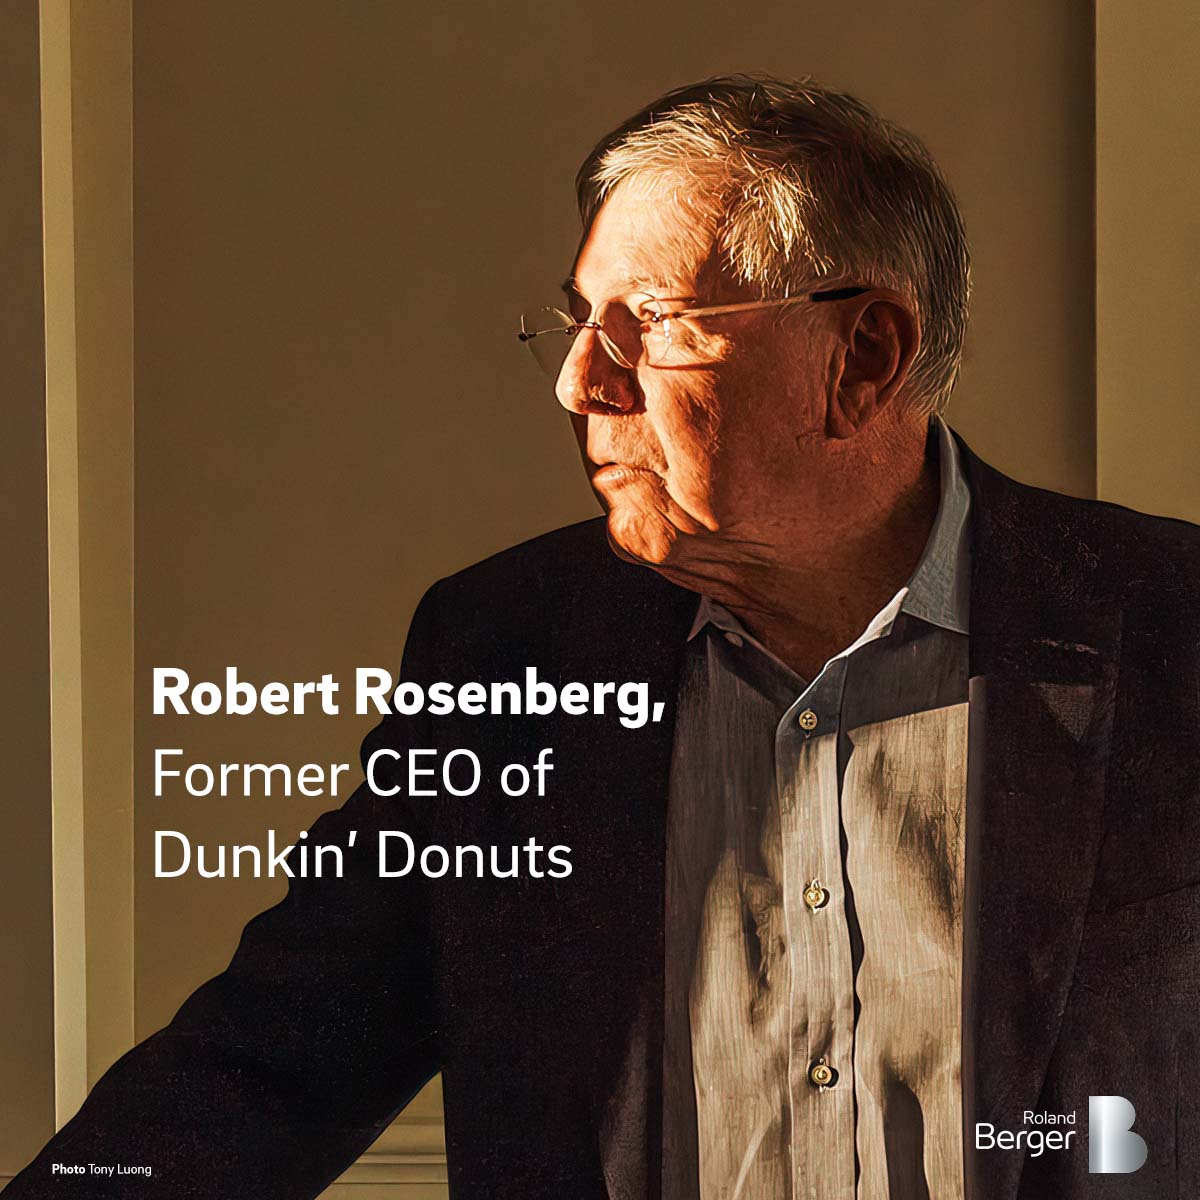 Robert Rosenberg, former CEO of @dunkindonuts offers unique insights how he engineered a dramatic #turnaround at the #coffee &amp; #donuts company and turned it into a well-known global brand during his 35-year tenure: https://t.co/a09cAIRBIM #ThinkActMagazine #leadership #management https://t.co/U3qAe8zQbT